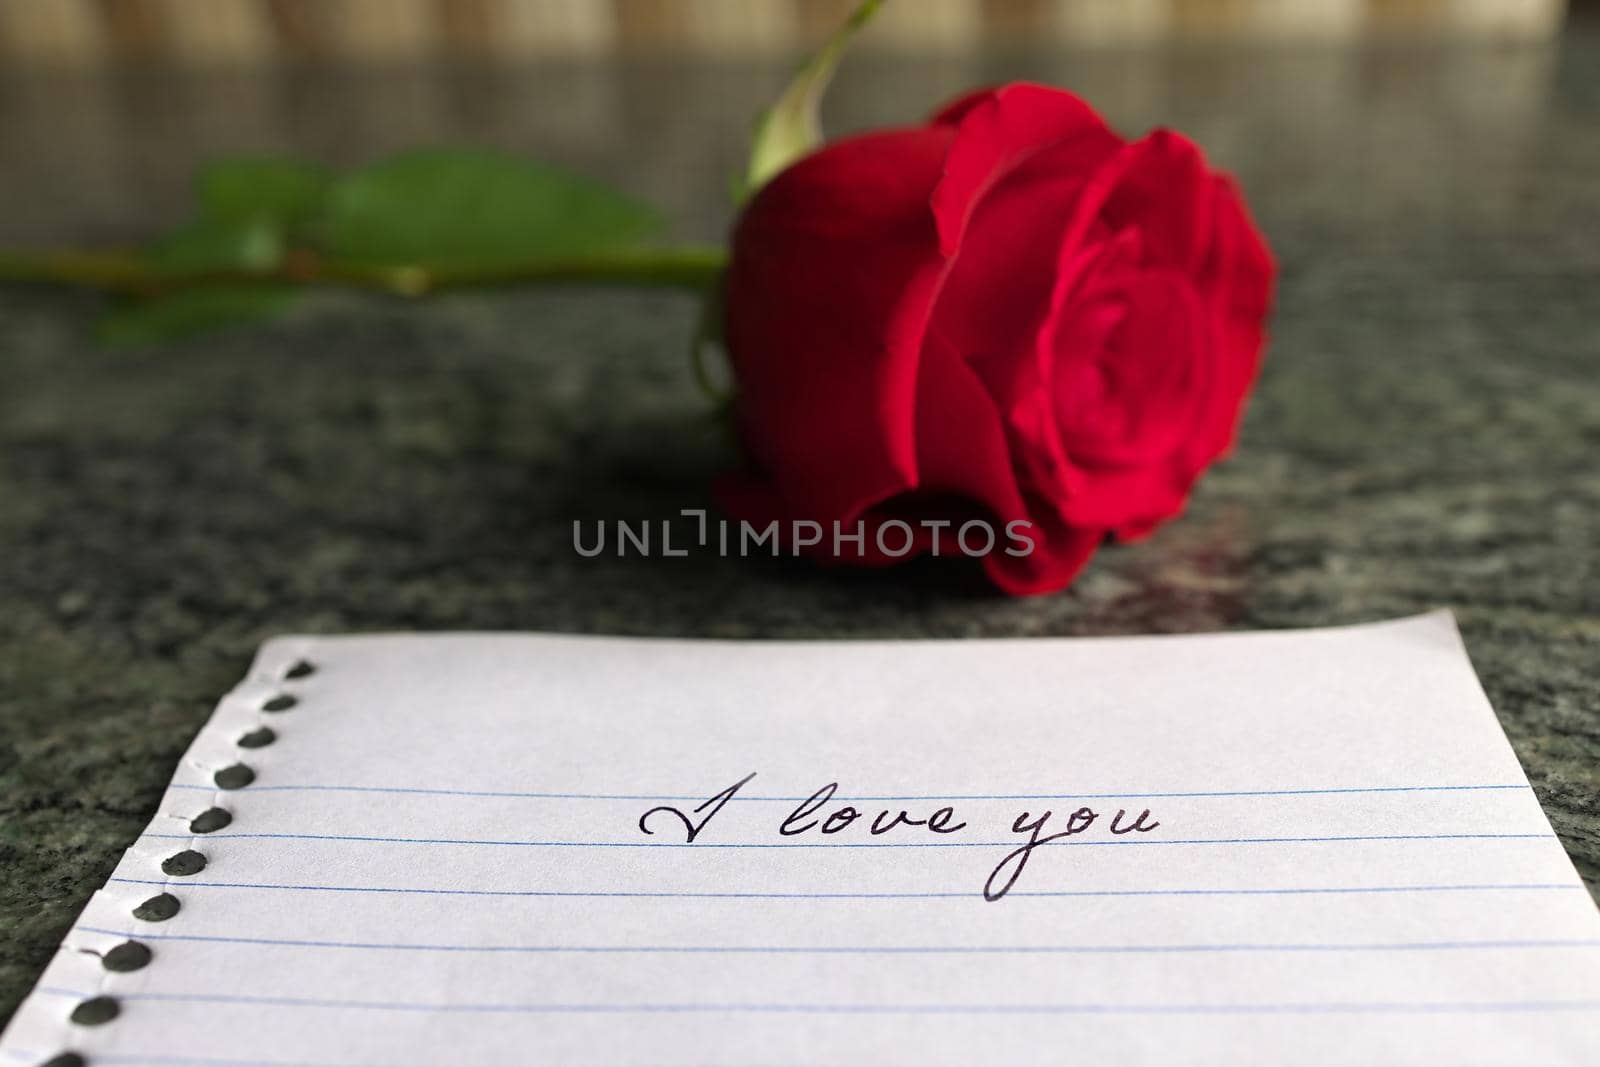 A Red Rose on a Granite Counter with an I Love You Note by markvandam